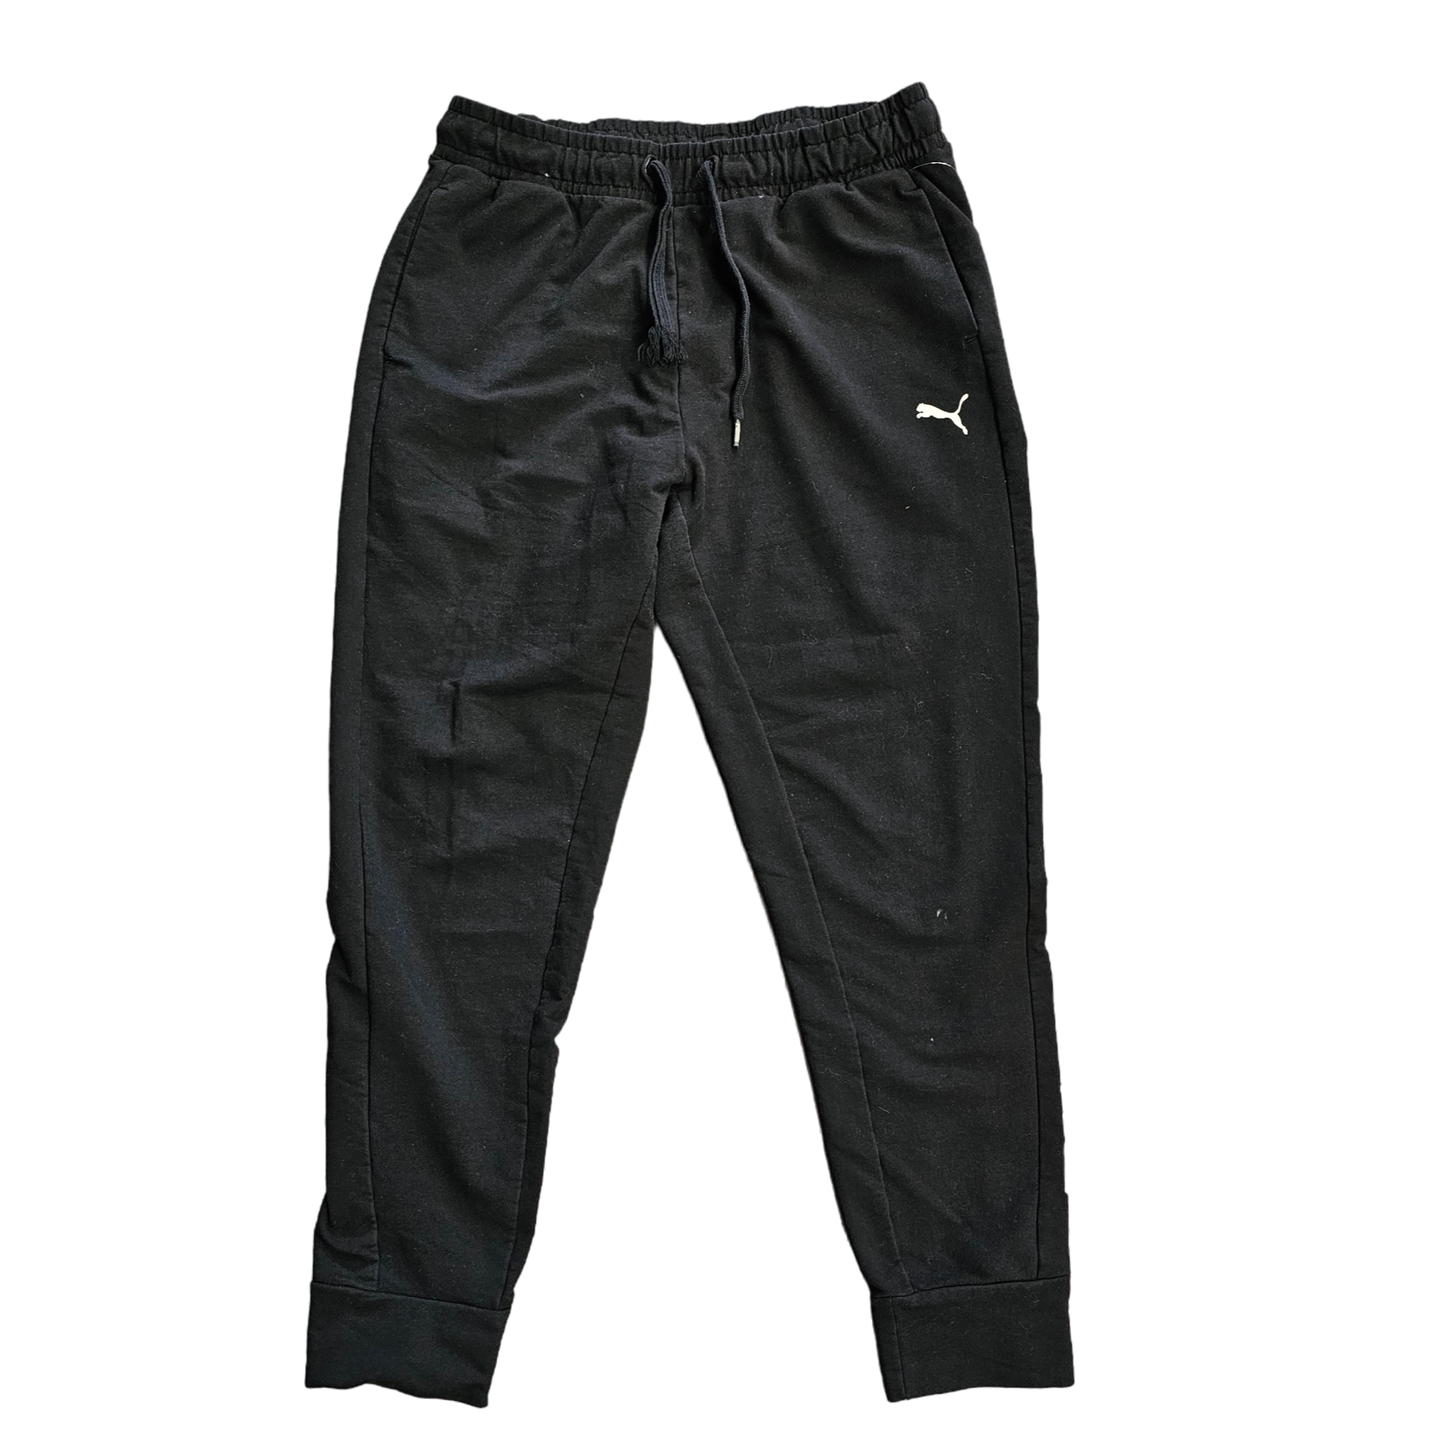 Athletic Pants By Puma  Size: M